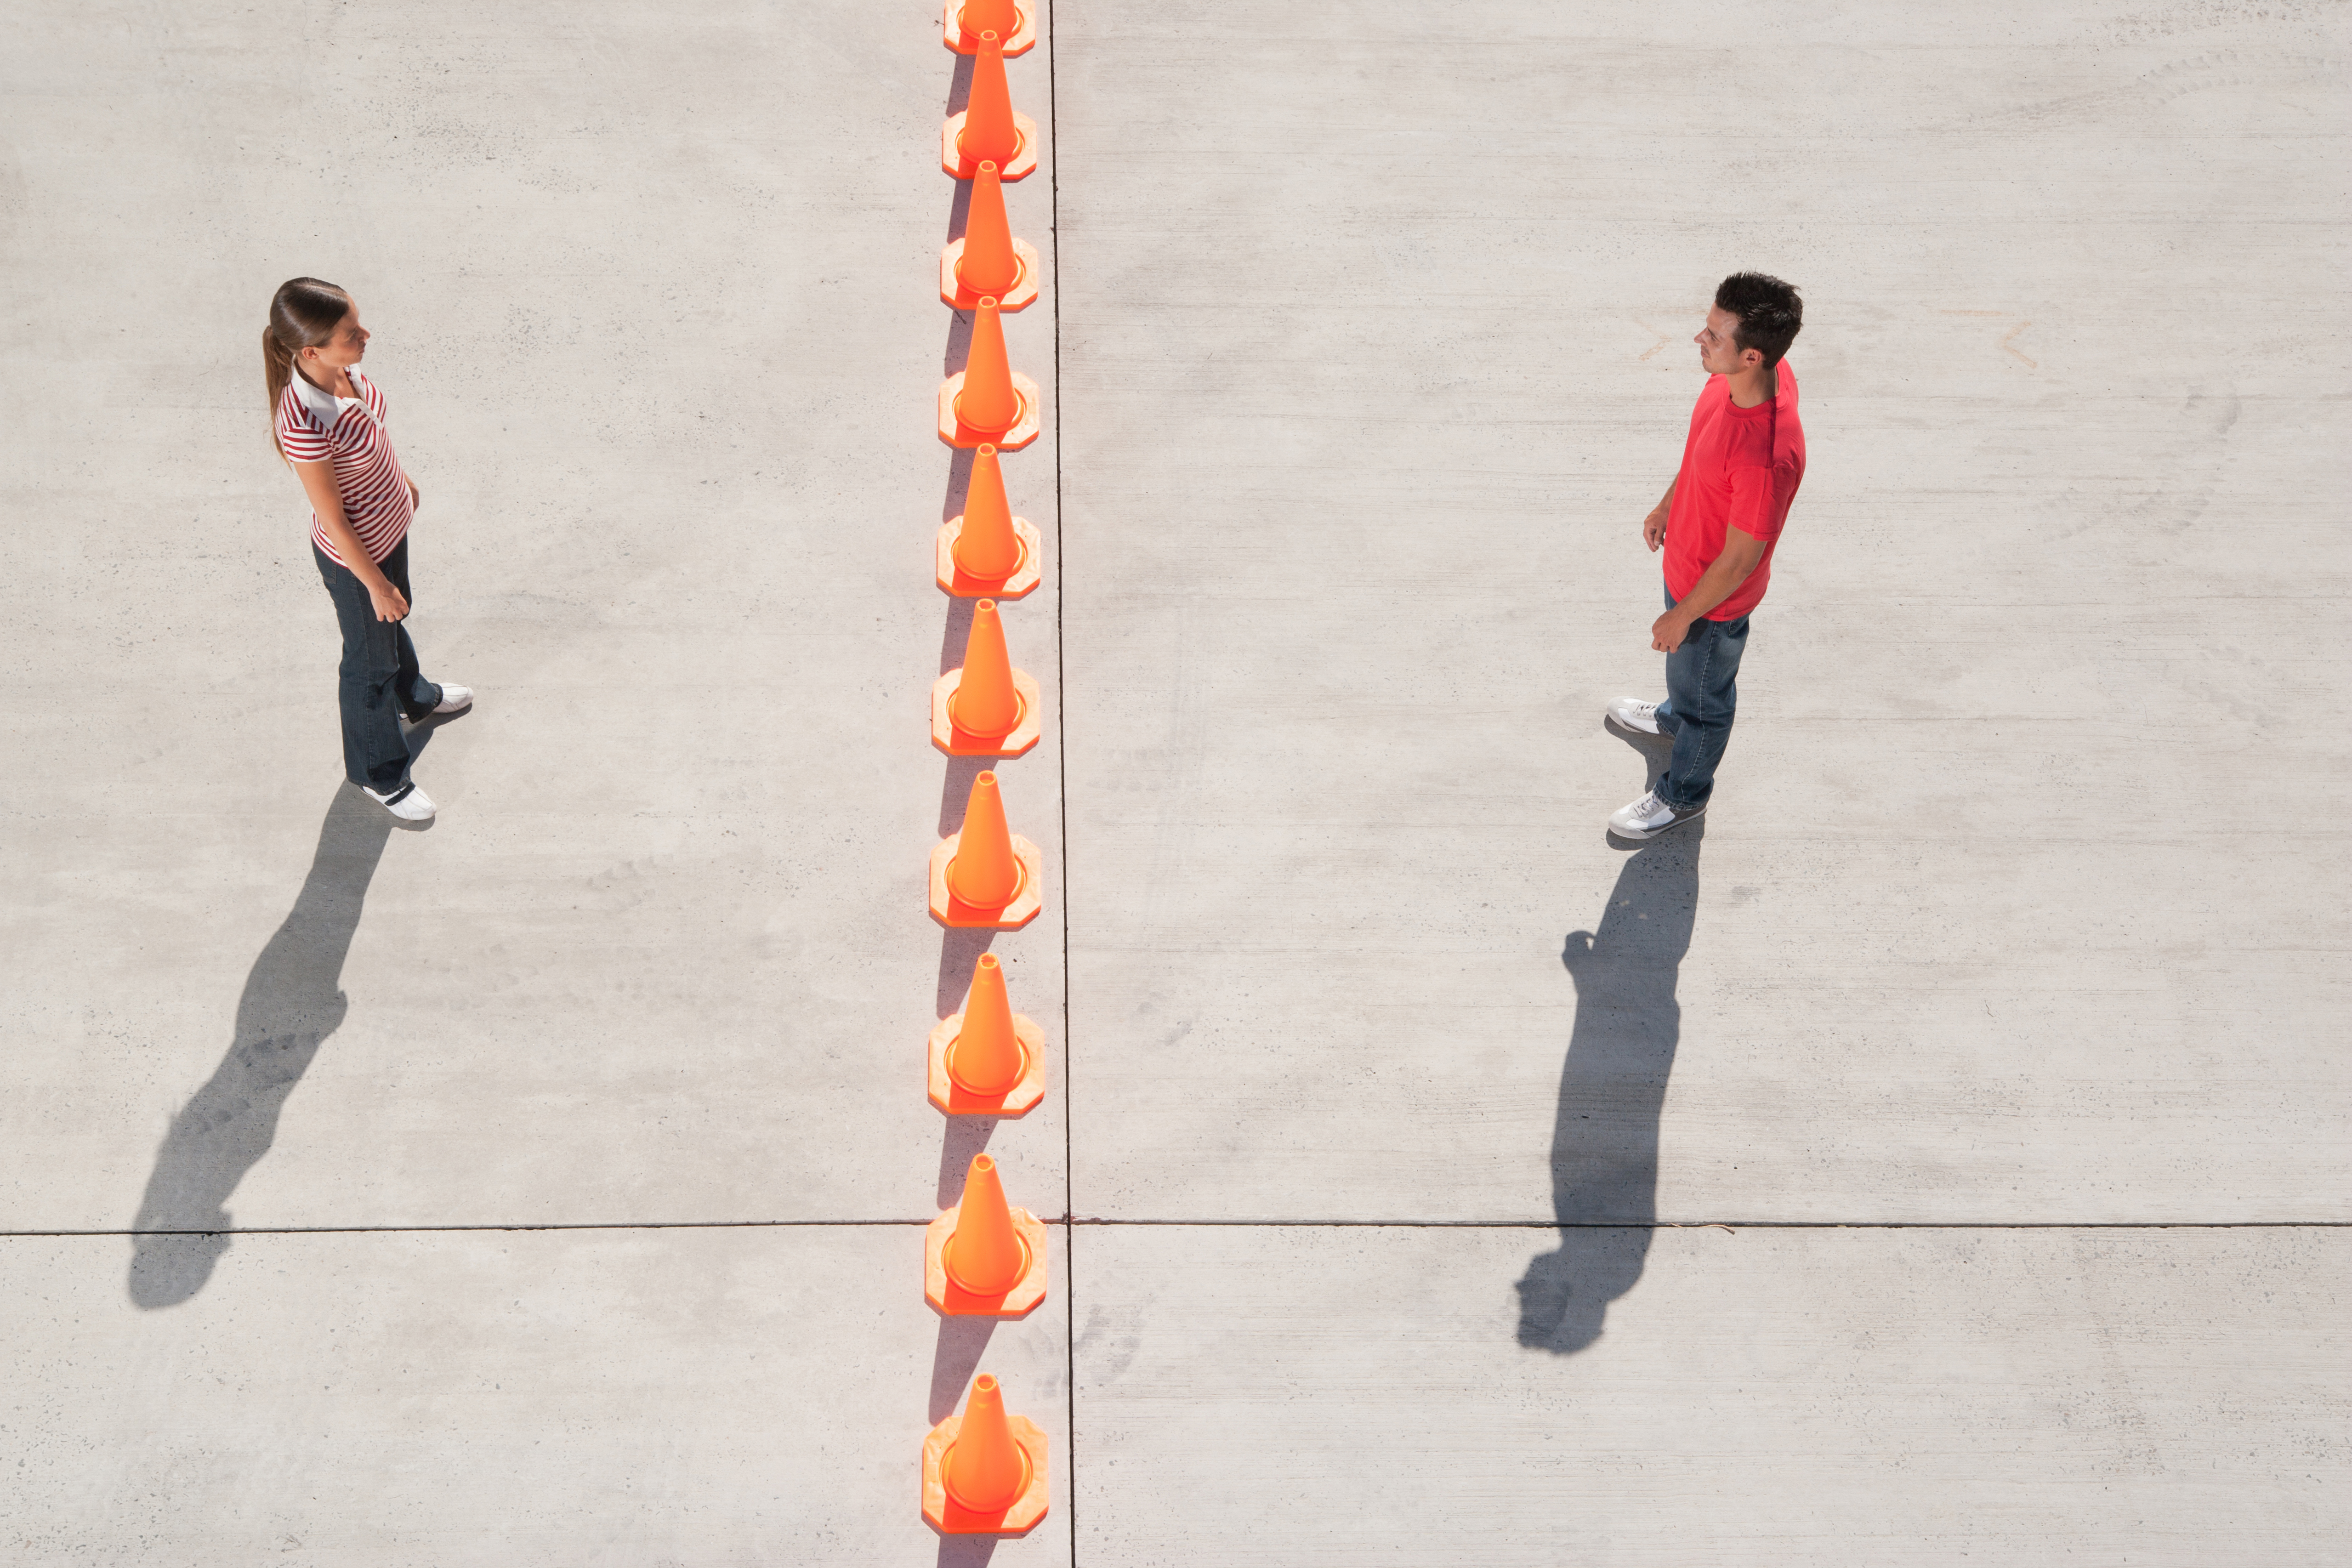 A couple standing on either side of a row of traffic cones | Source: Getty Images